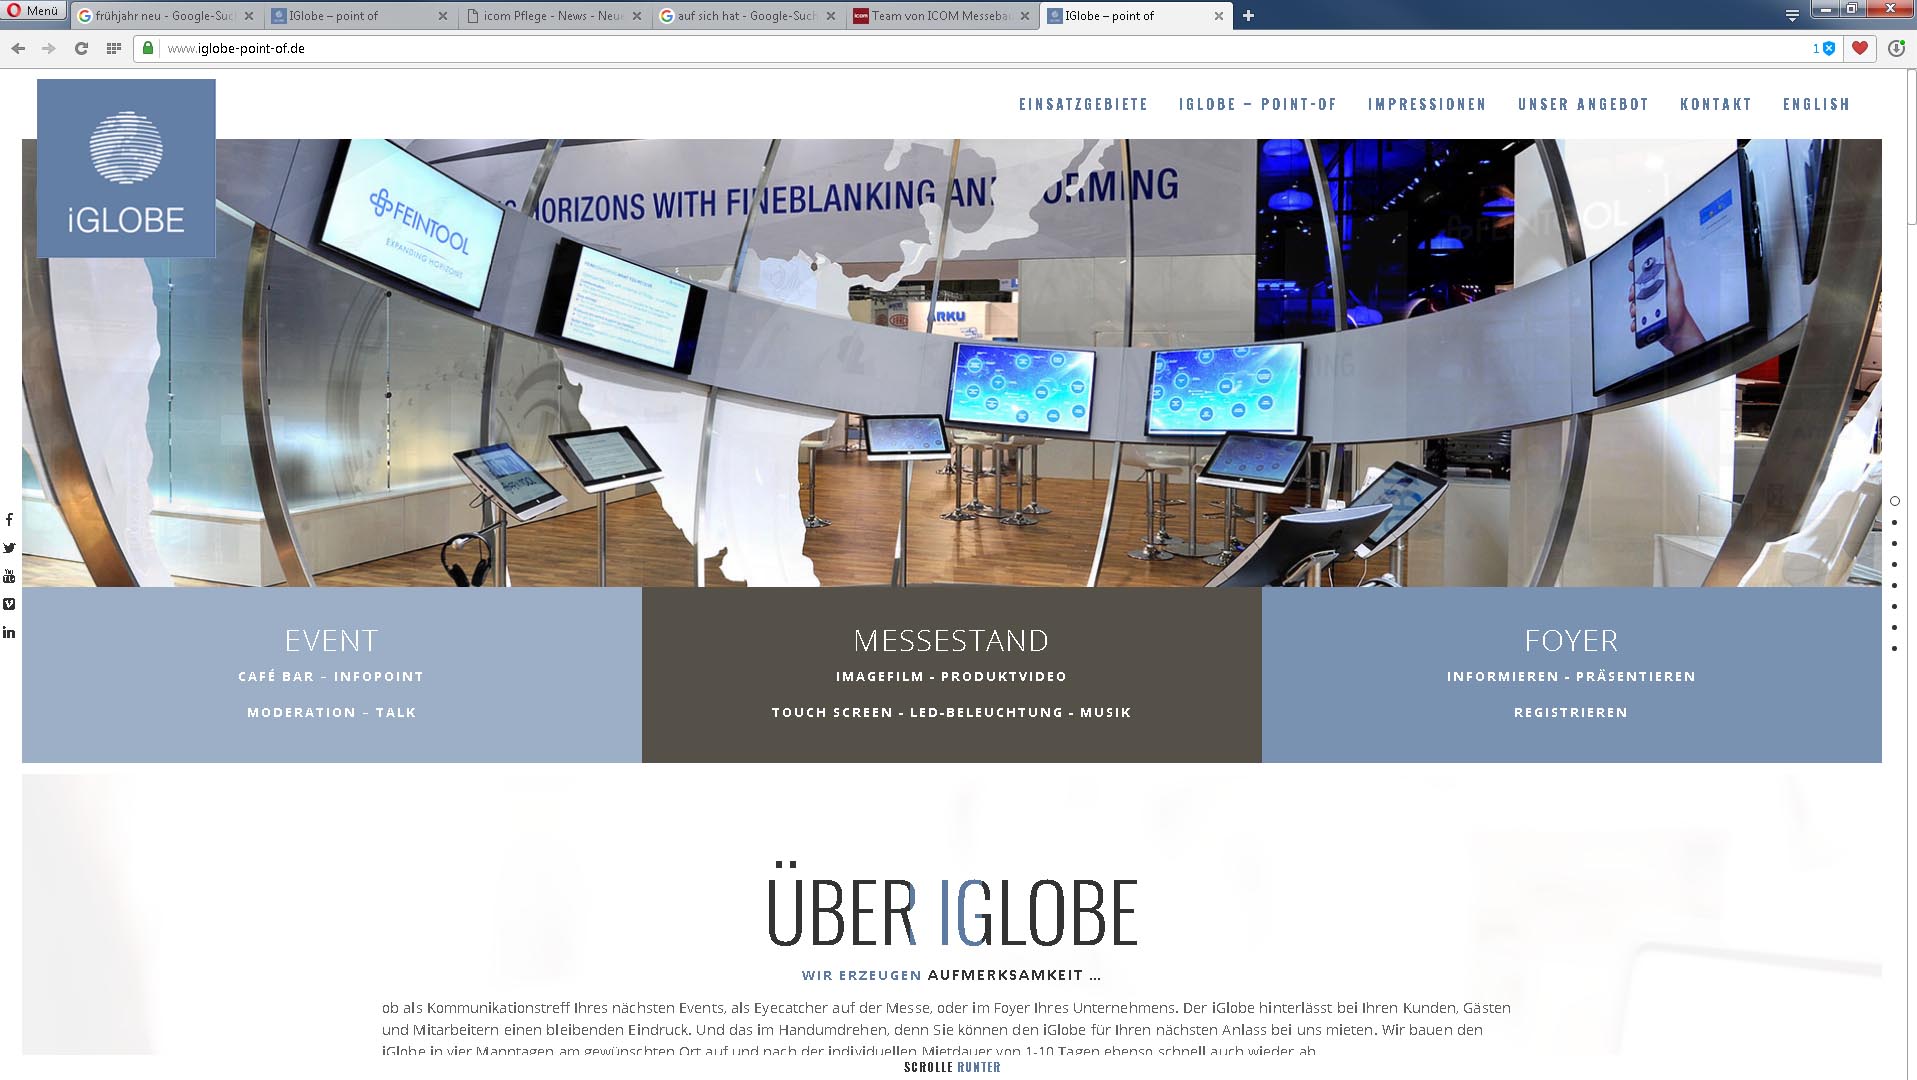 IGlobe now has its own website!